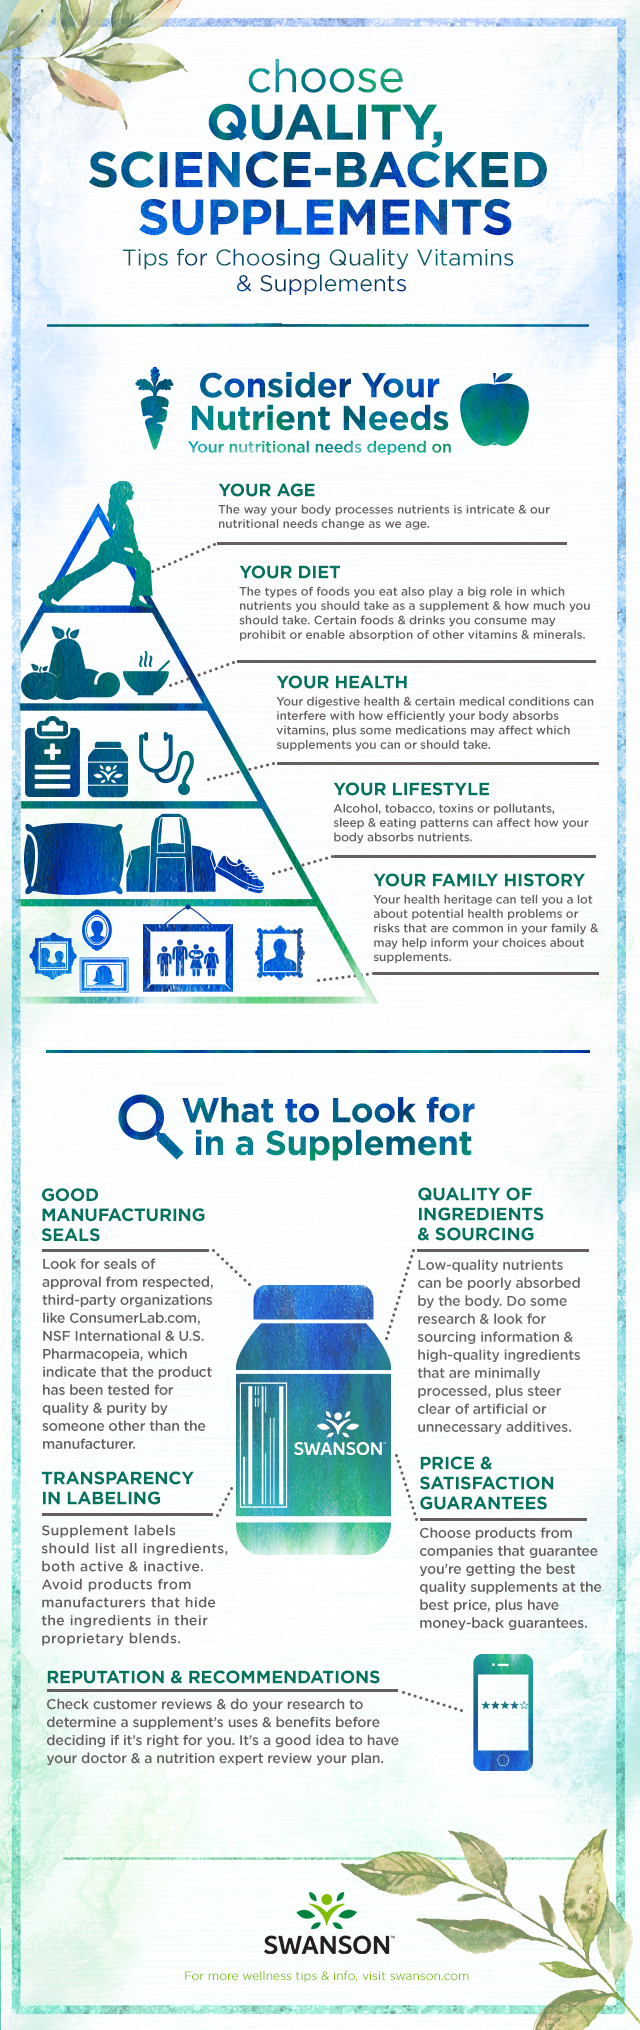 Tips for Choosing Quality Supplements - infographic by Swanson Health